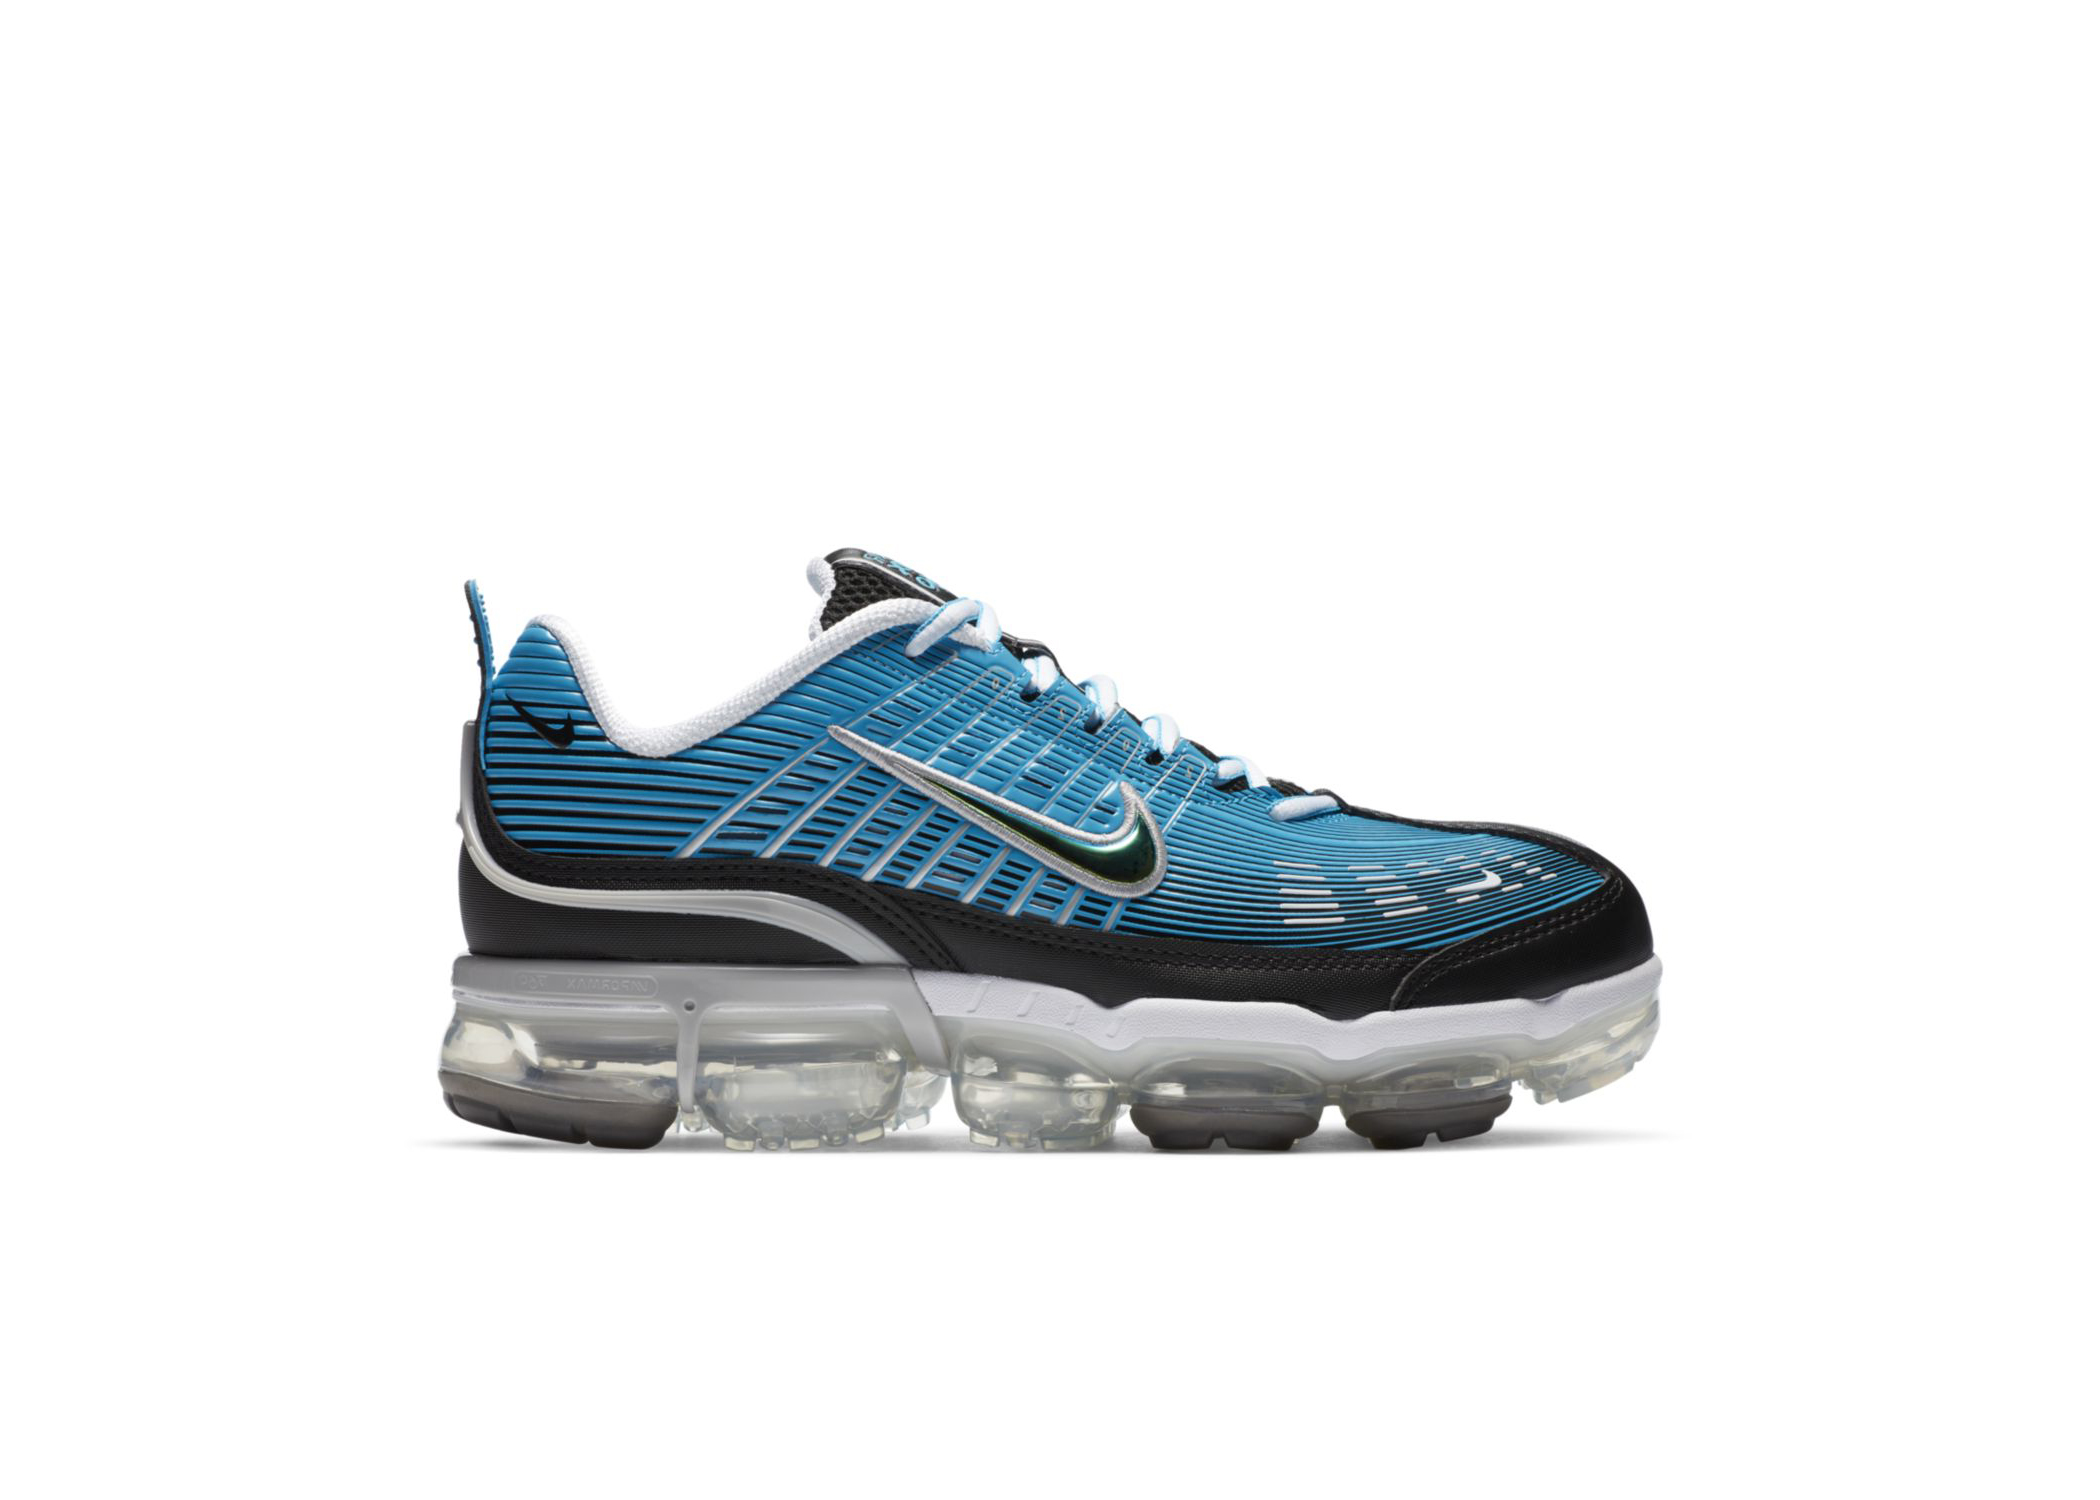 vapormax 360 blue and white